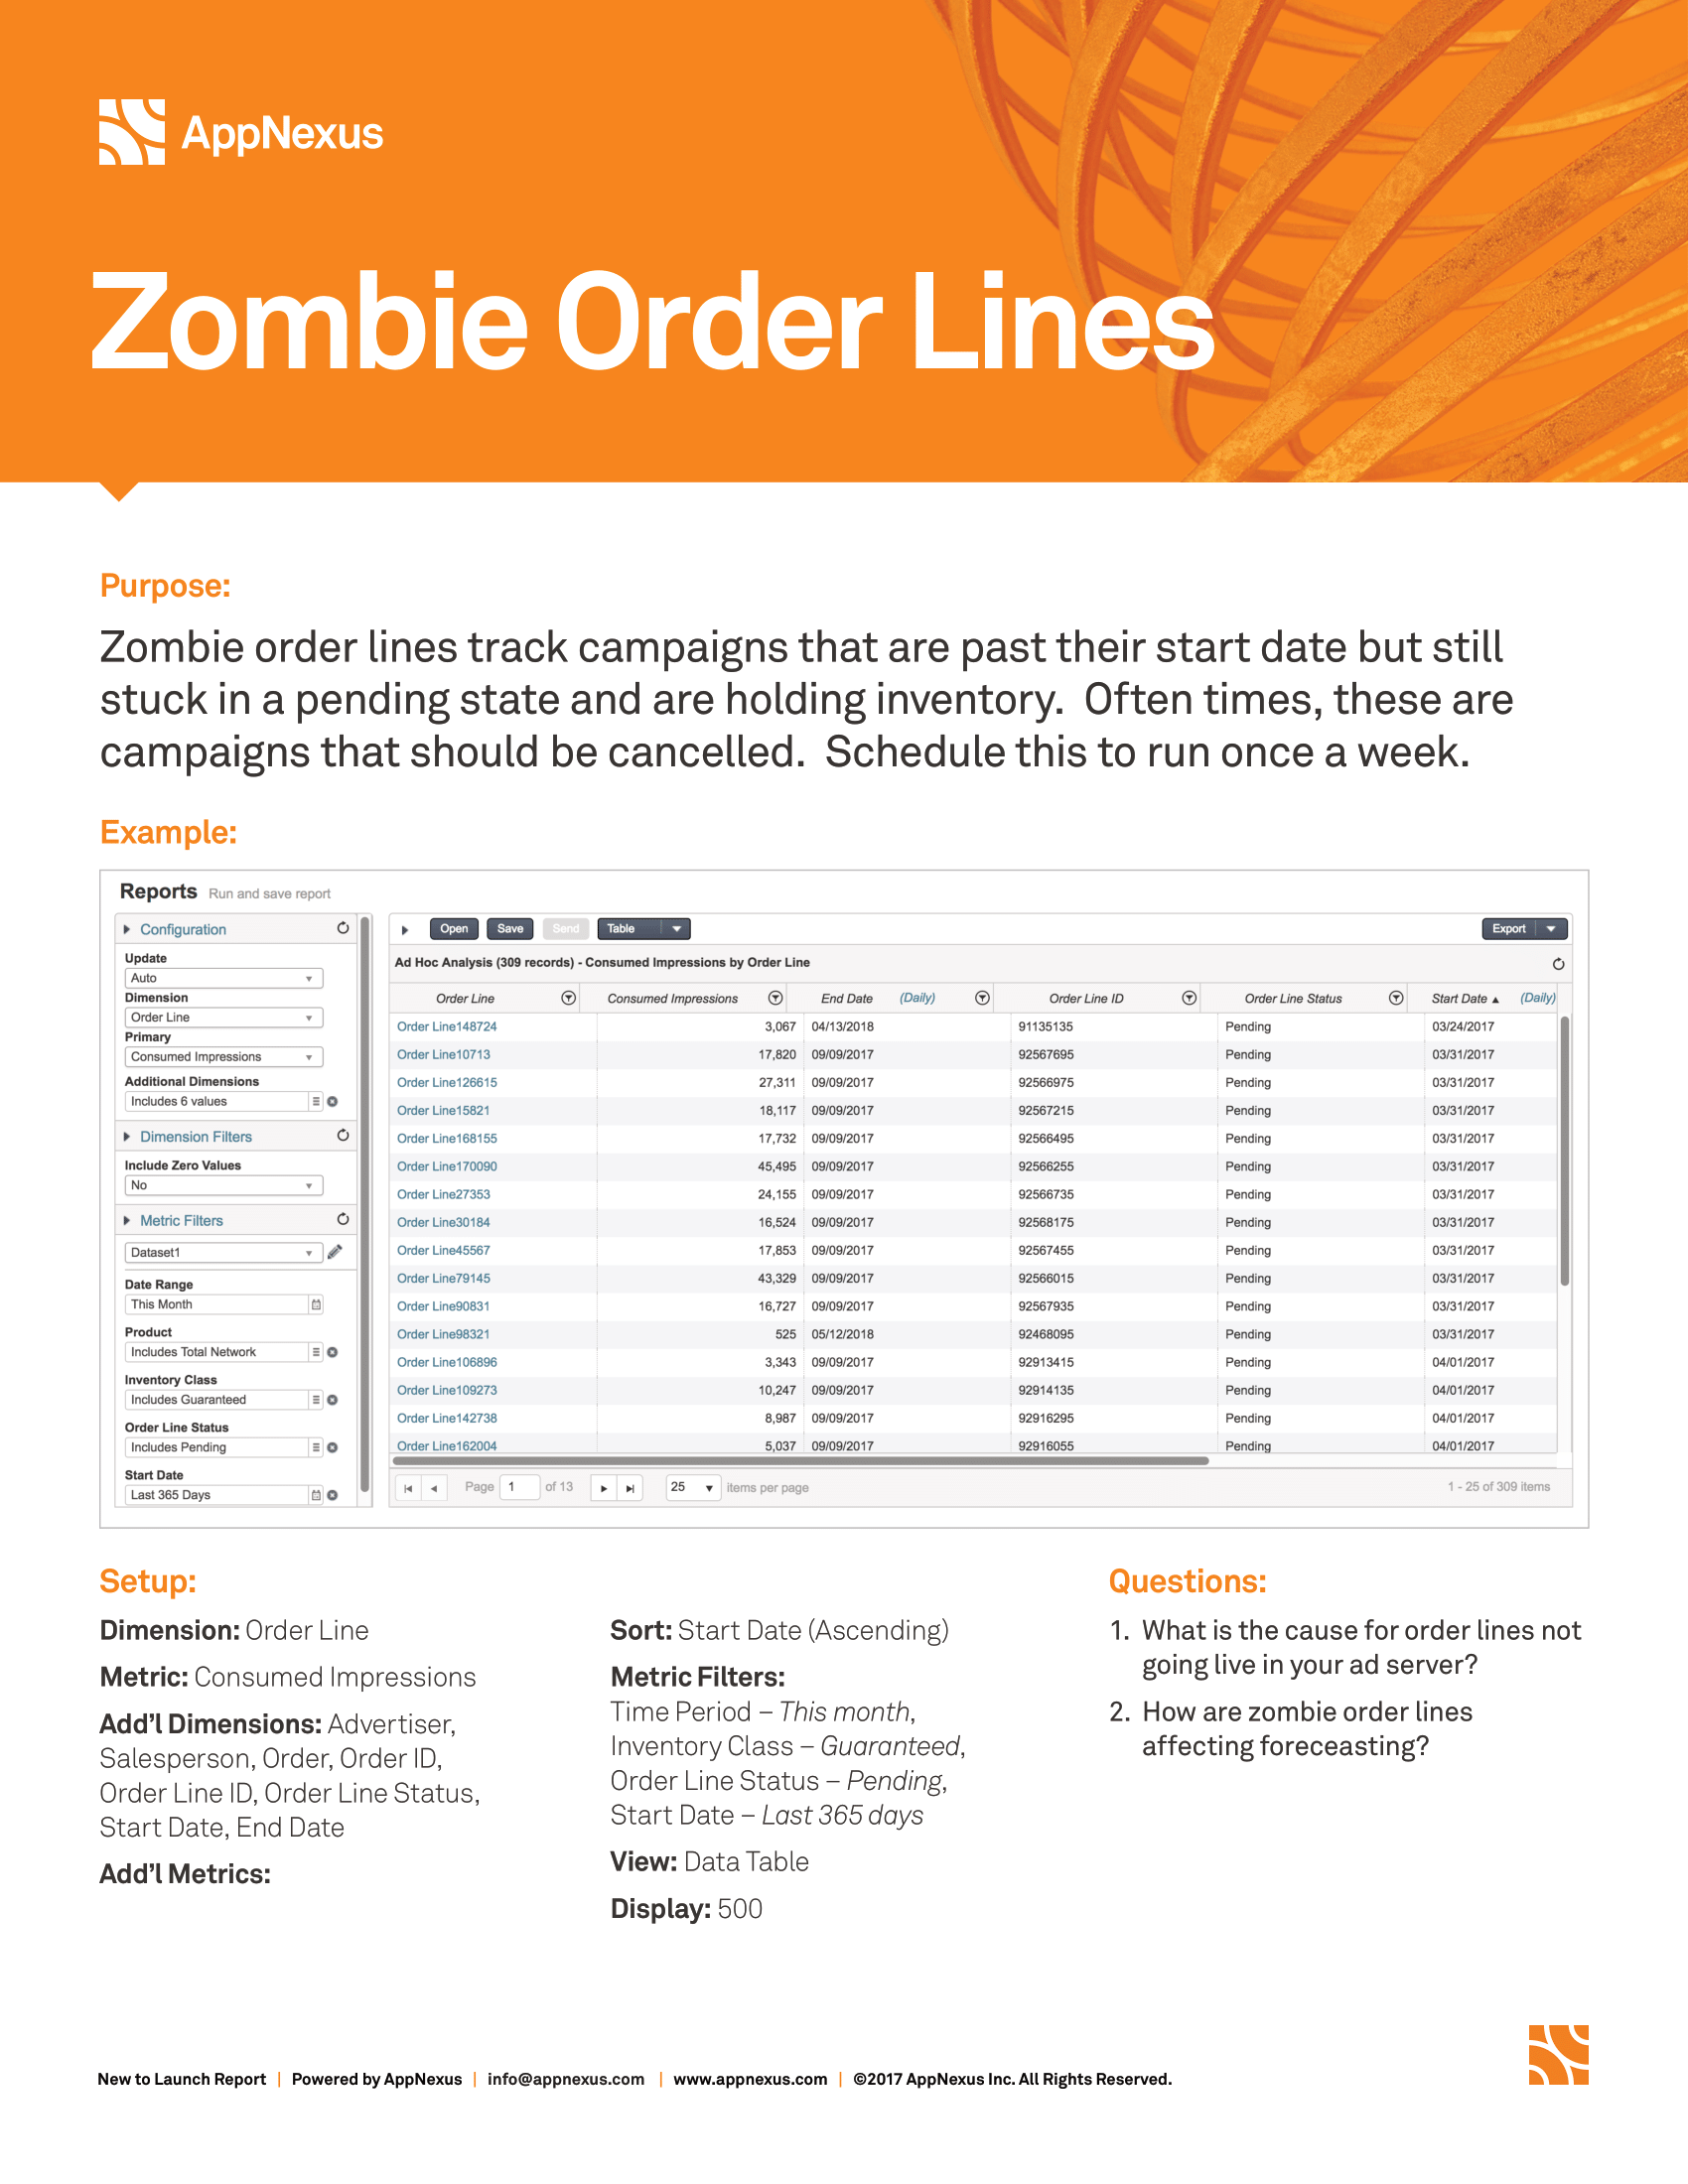 Screenshot that provides details about the Zombie Order Lines report.